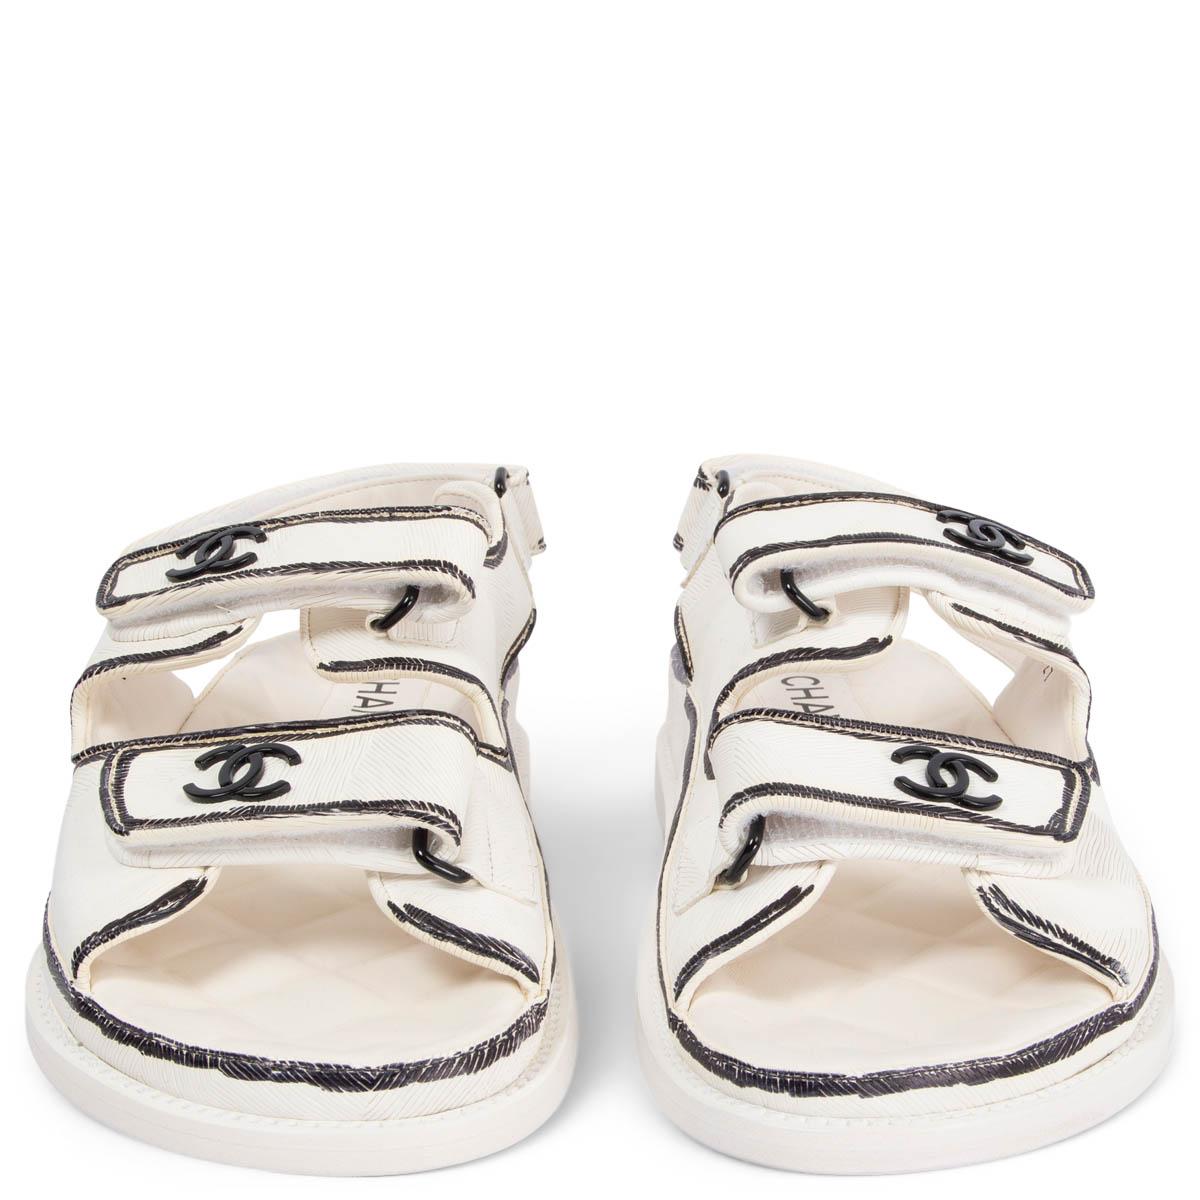 white and black chanel sandals 38